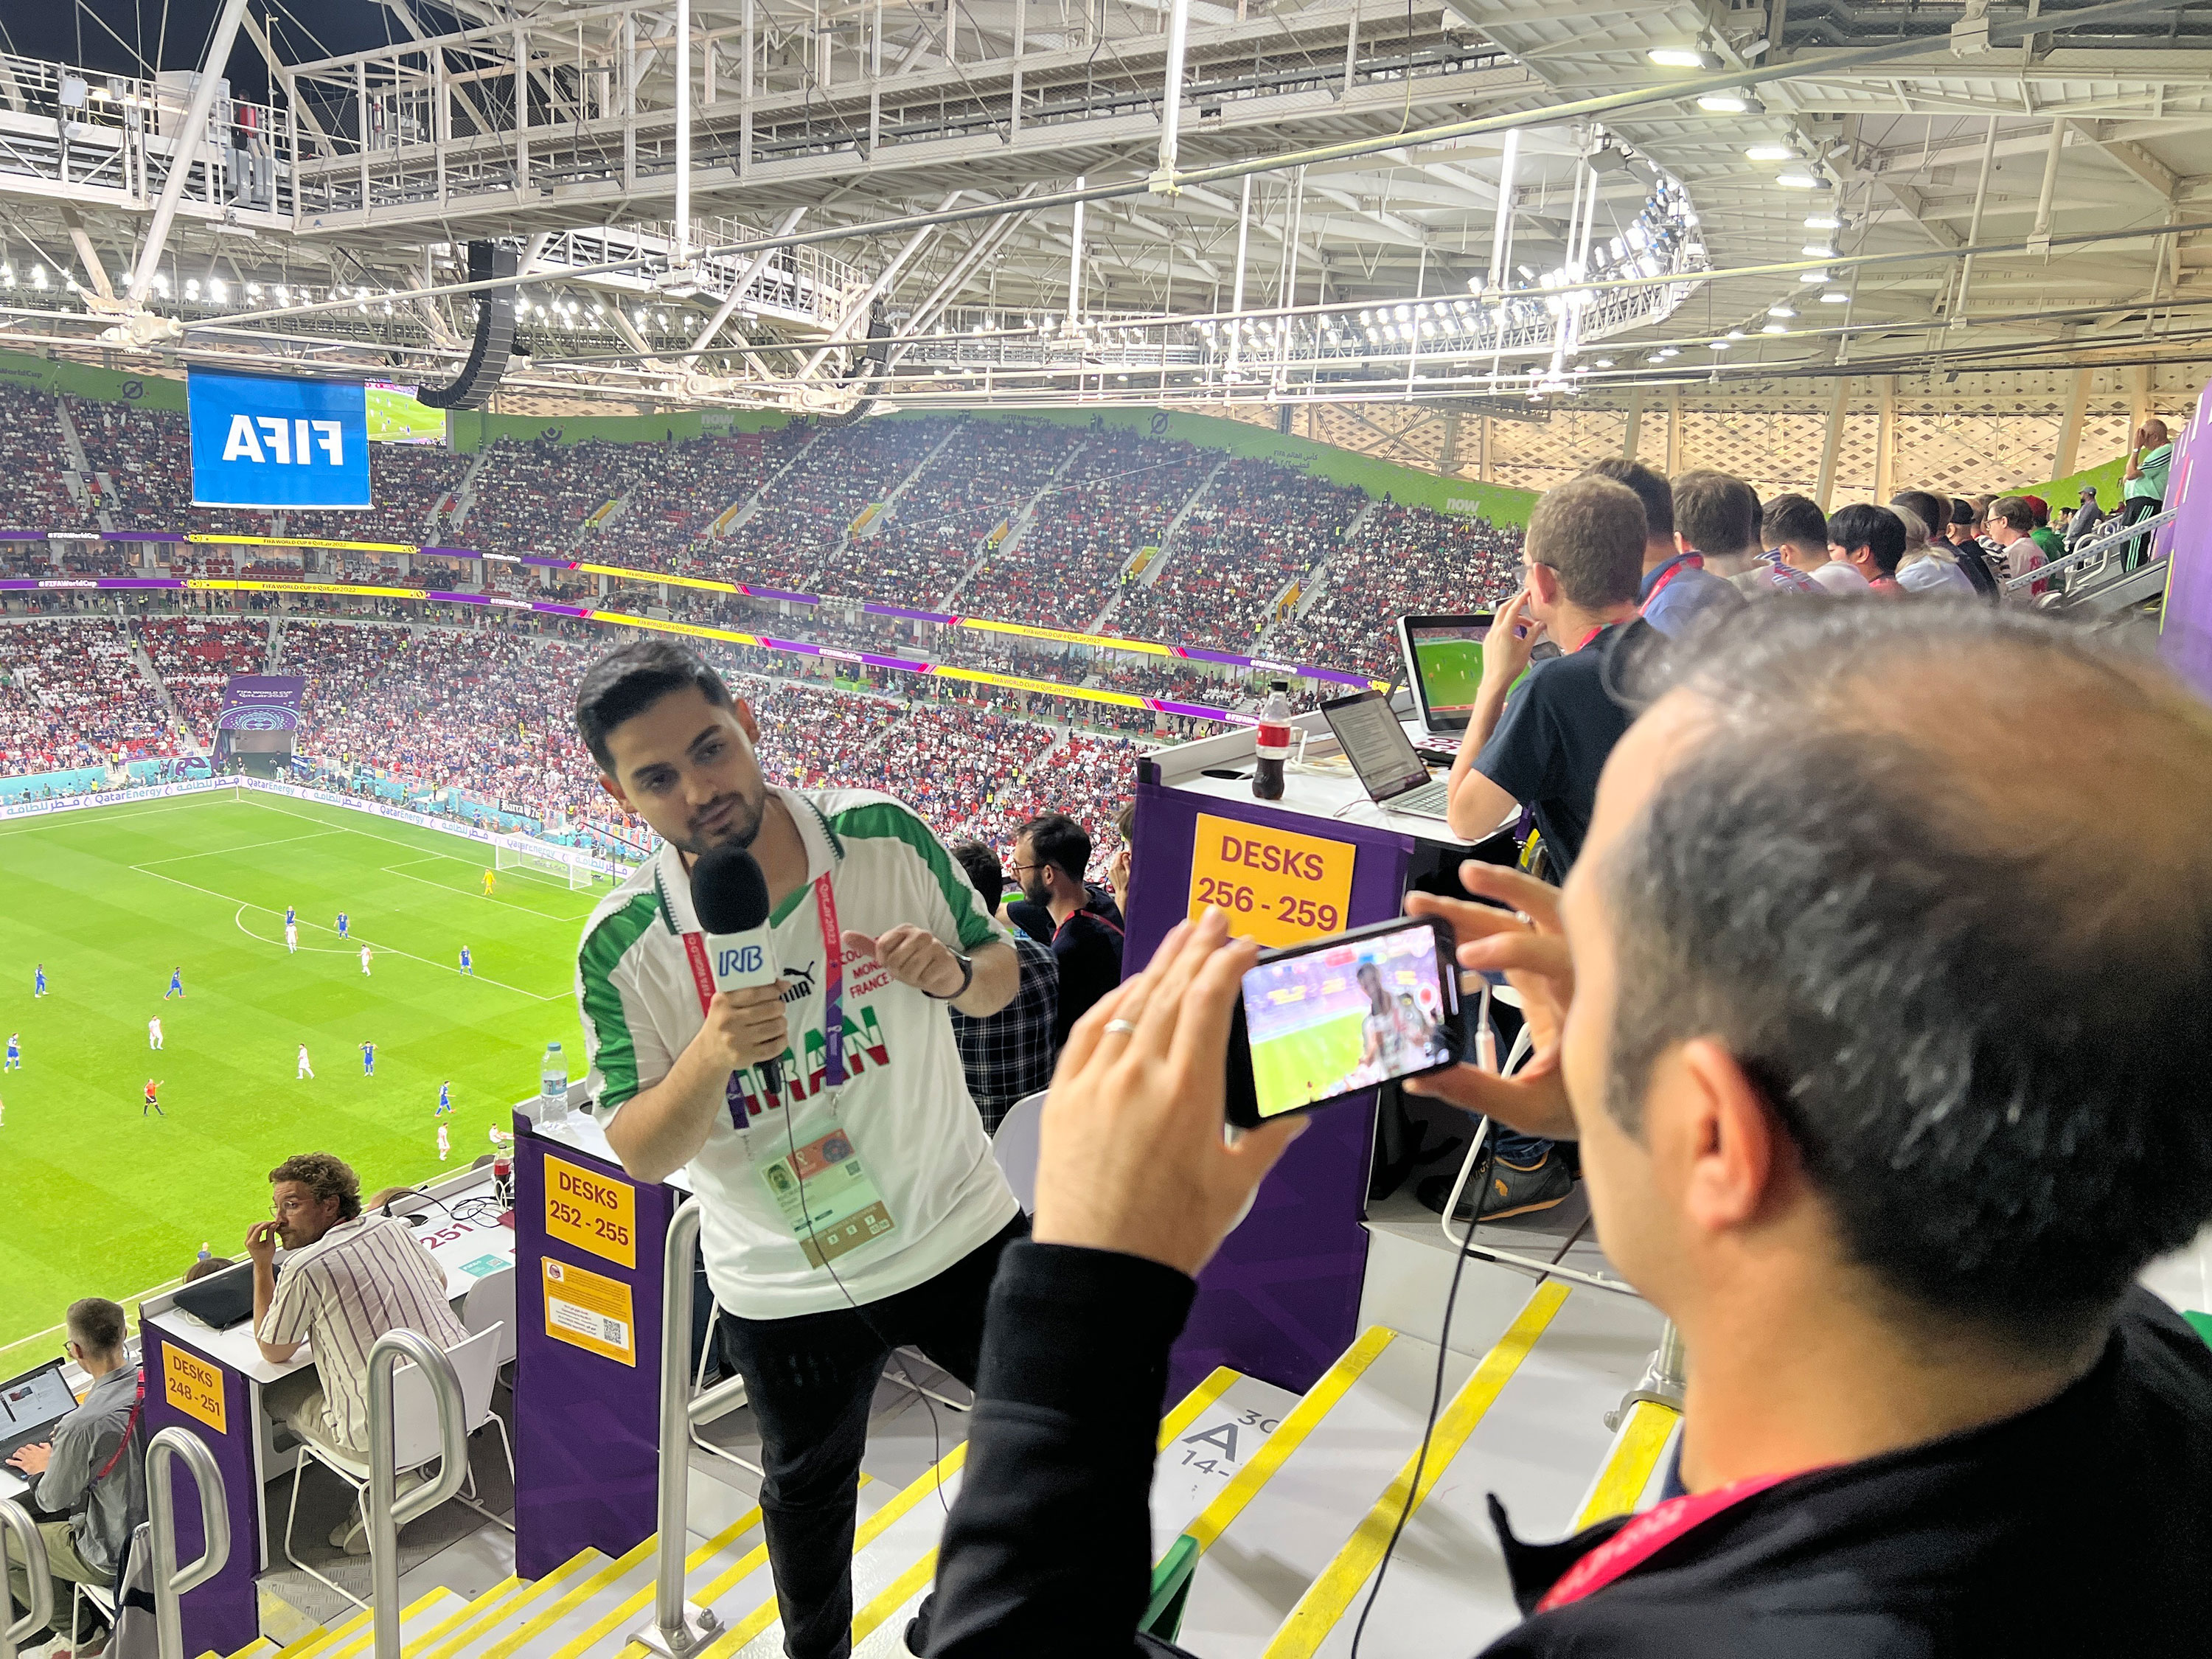 The Iranian state media (IRIB), wearing the 1998 World Cup jersey, reported from inside the match. They hope to repeat that night in France, when Iran beat the United States.